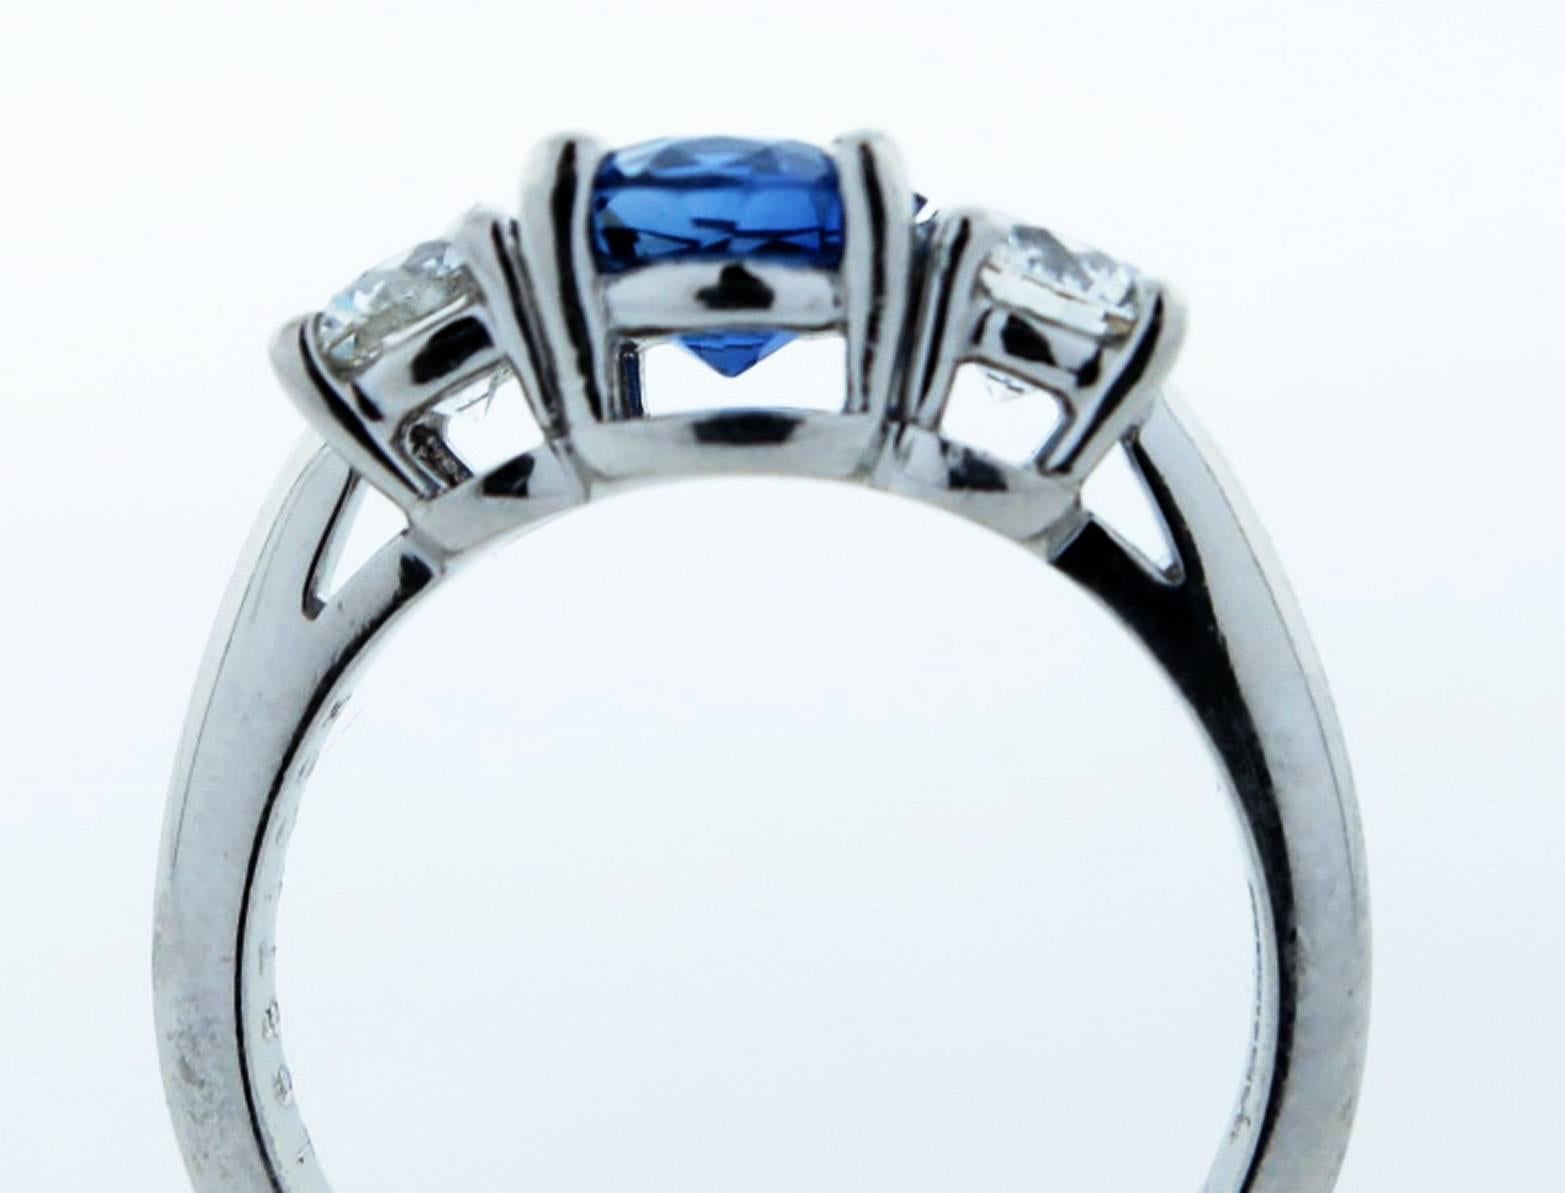 Tiffany & Co. three stone platinum mount sapphire and diamond ring. The center is prong set with a gem color natural round faceted blue sapphire weighing approx 1.25cts. Each side is set with a twinkling round brilliant cut diamond each weighing